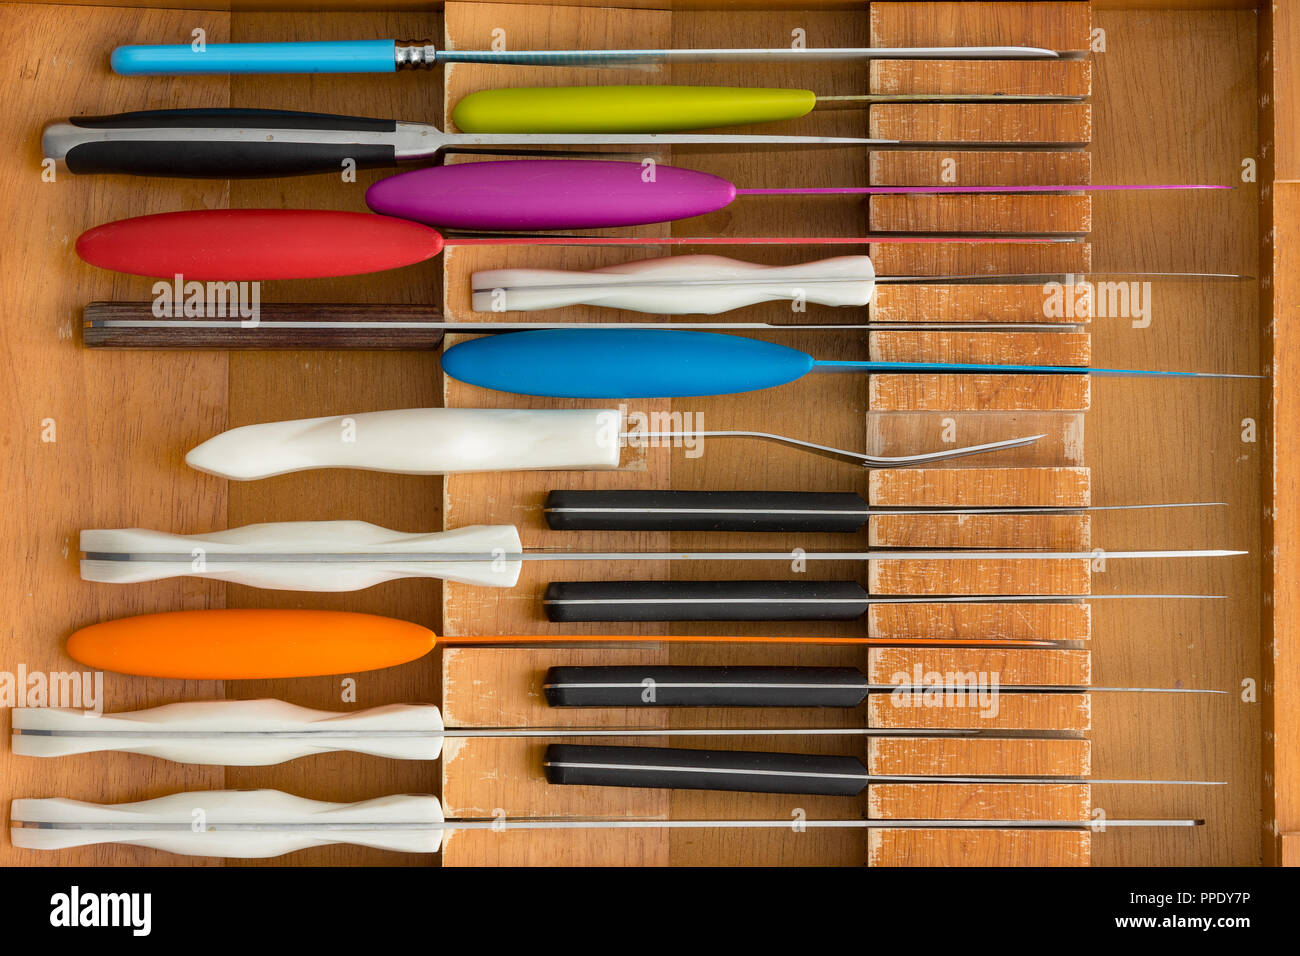 Neat arrangement of diverse knives in a fitted knife drawer in a wooden kitchen cabinet viewed from above in a close up full frame view Stock Photo